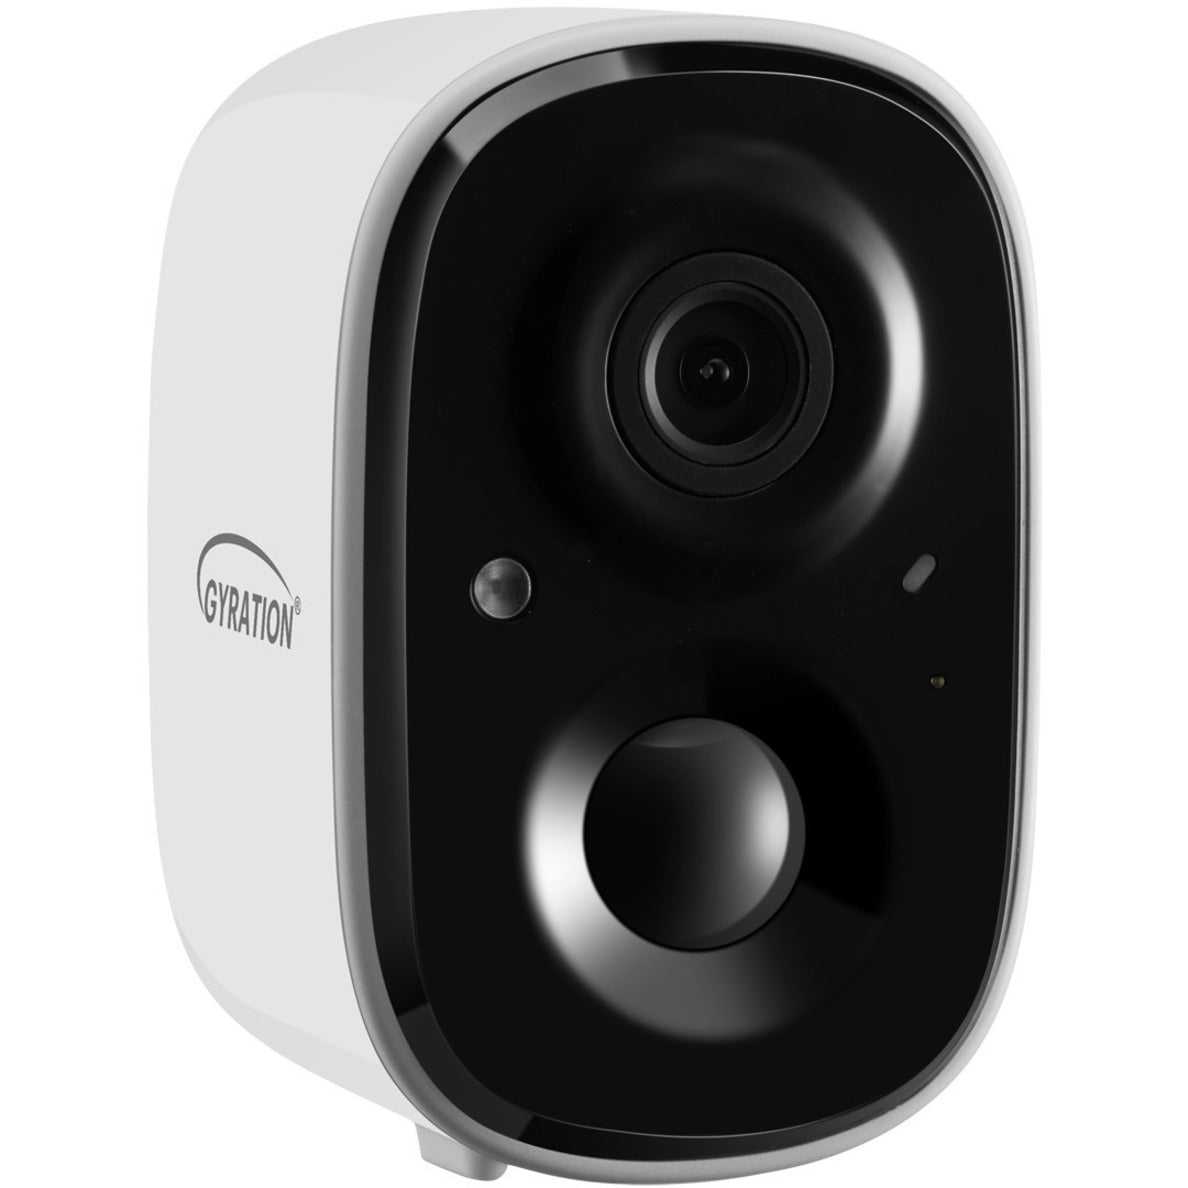 Gyration CYBERVIEW 2010 2MP Smart WiFi Wireless Camera, Full HD, Motion Detection, SD Card Local Storage, Indoor/Outdoor, IP65